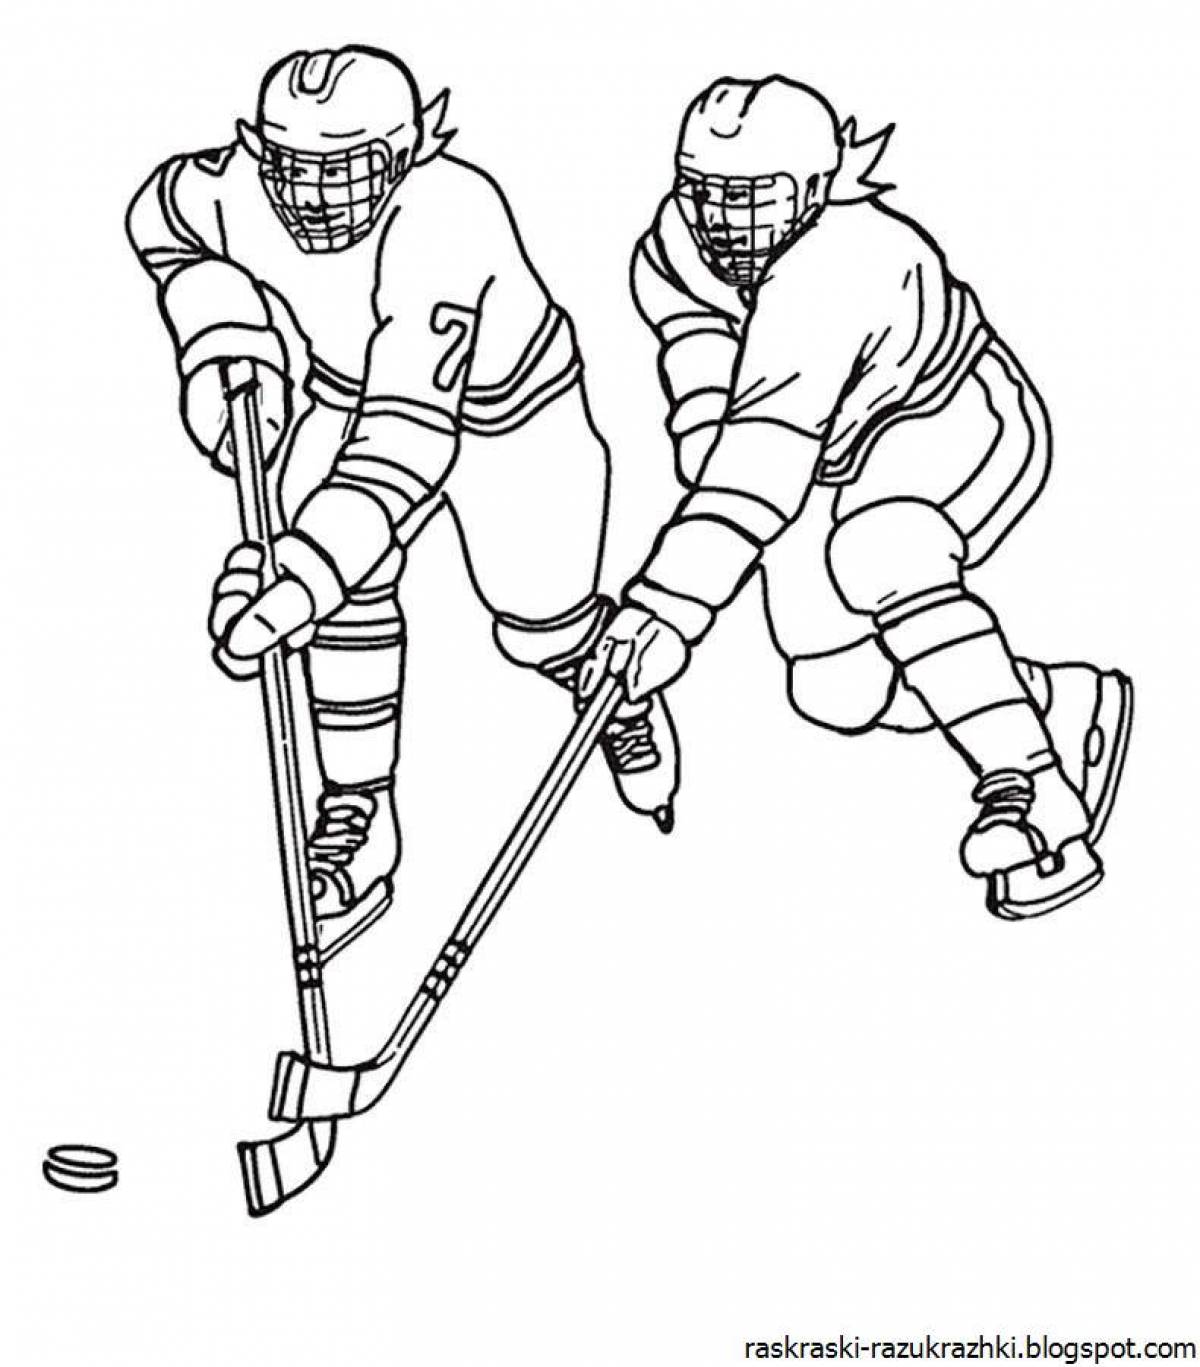 Coloring book outstanding hockey player for kids